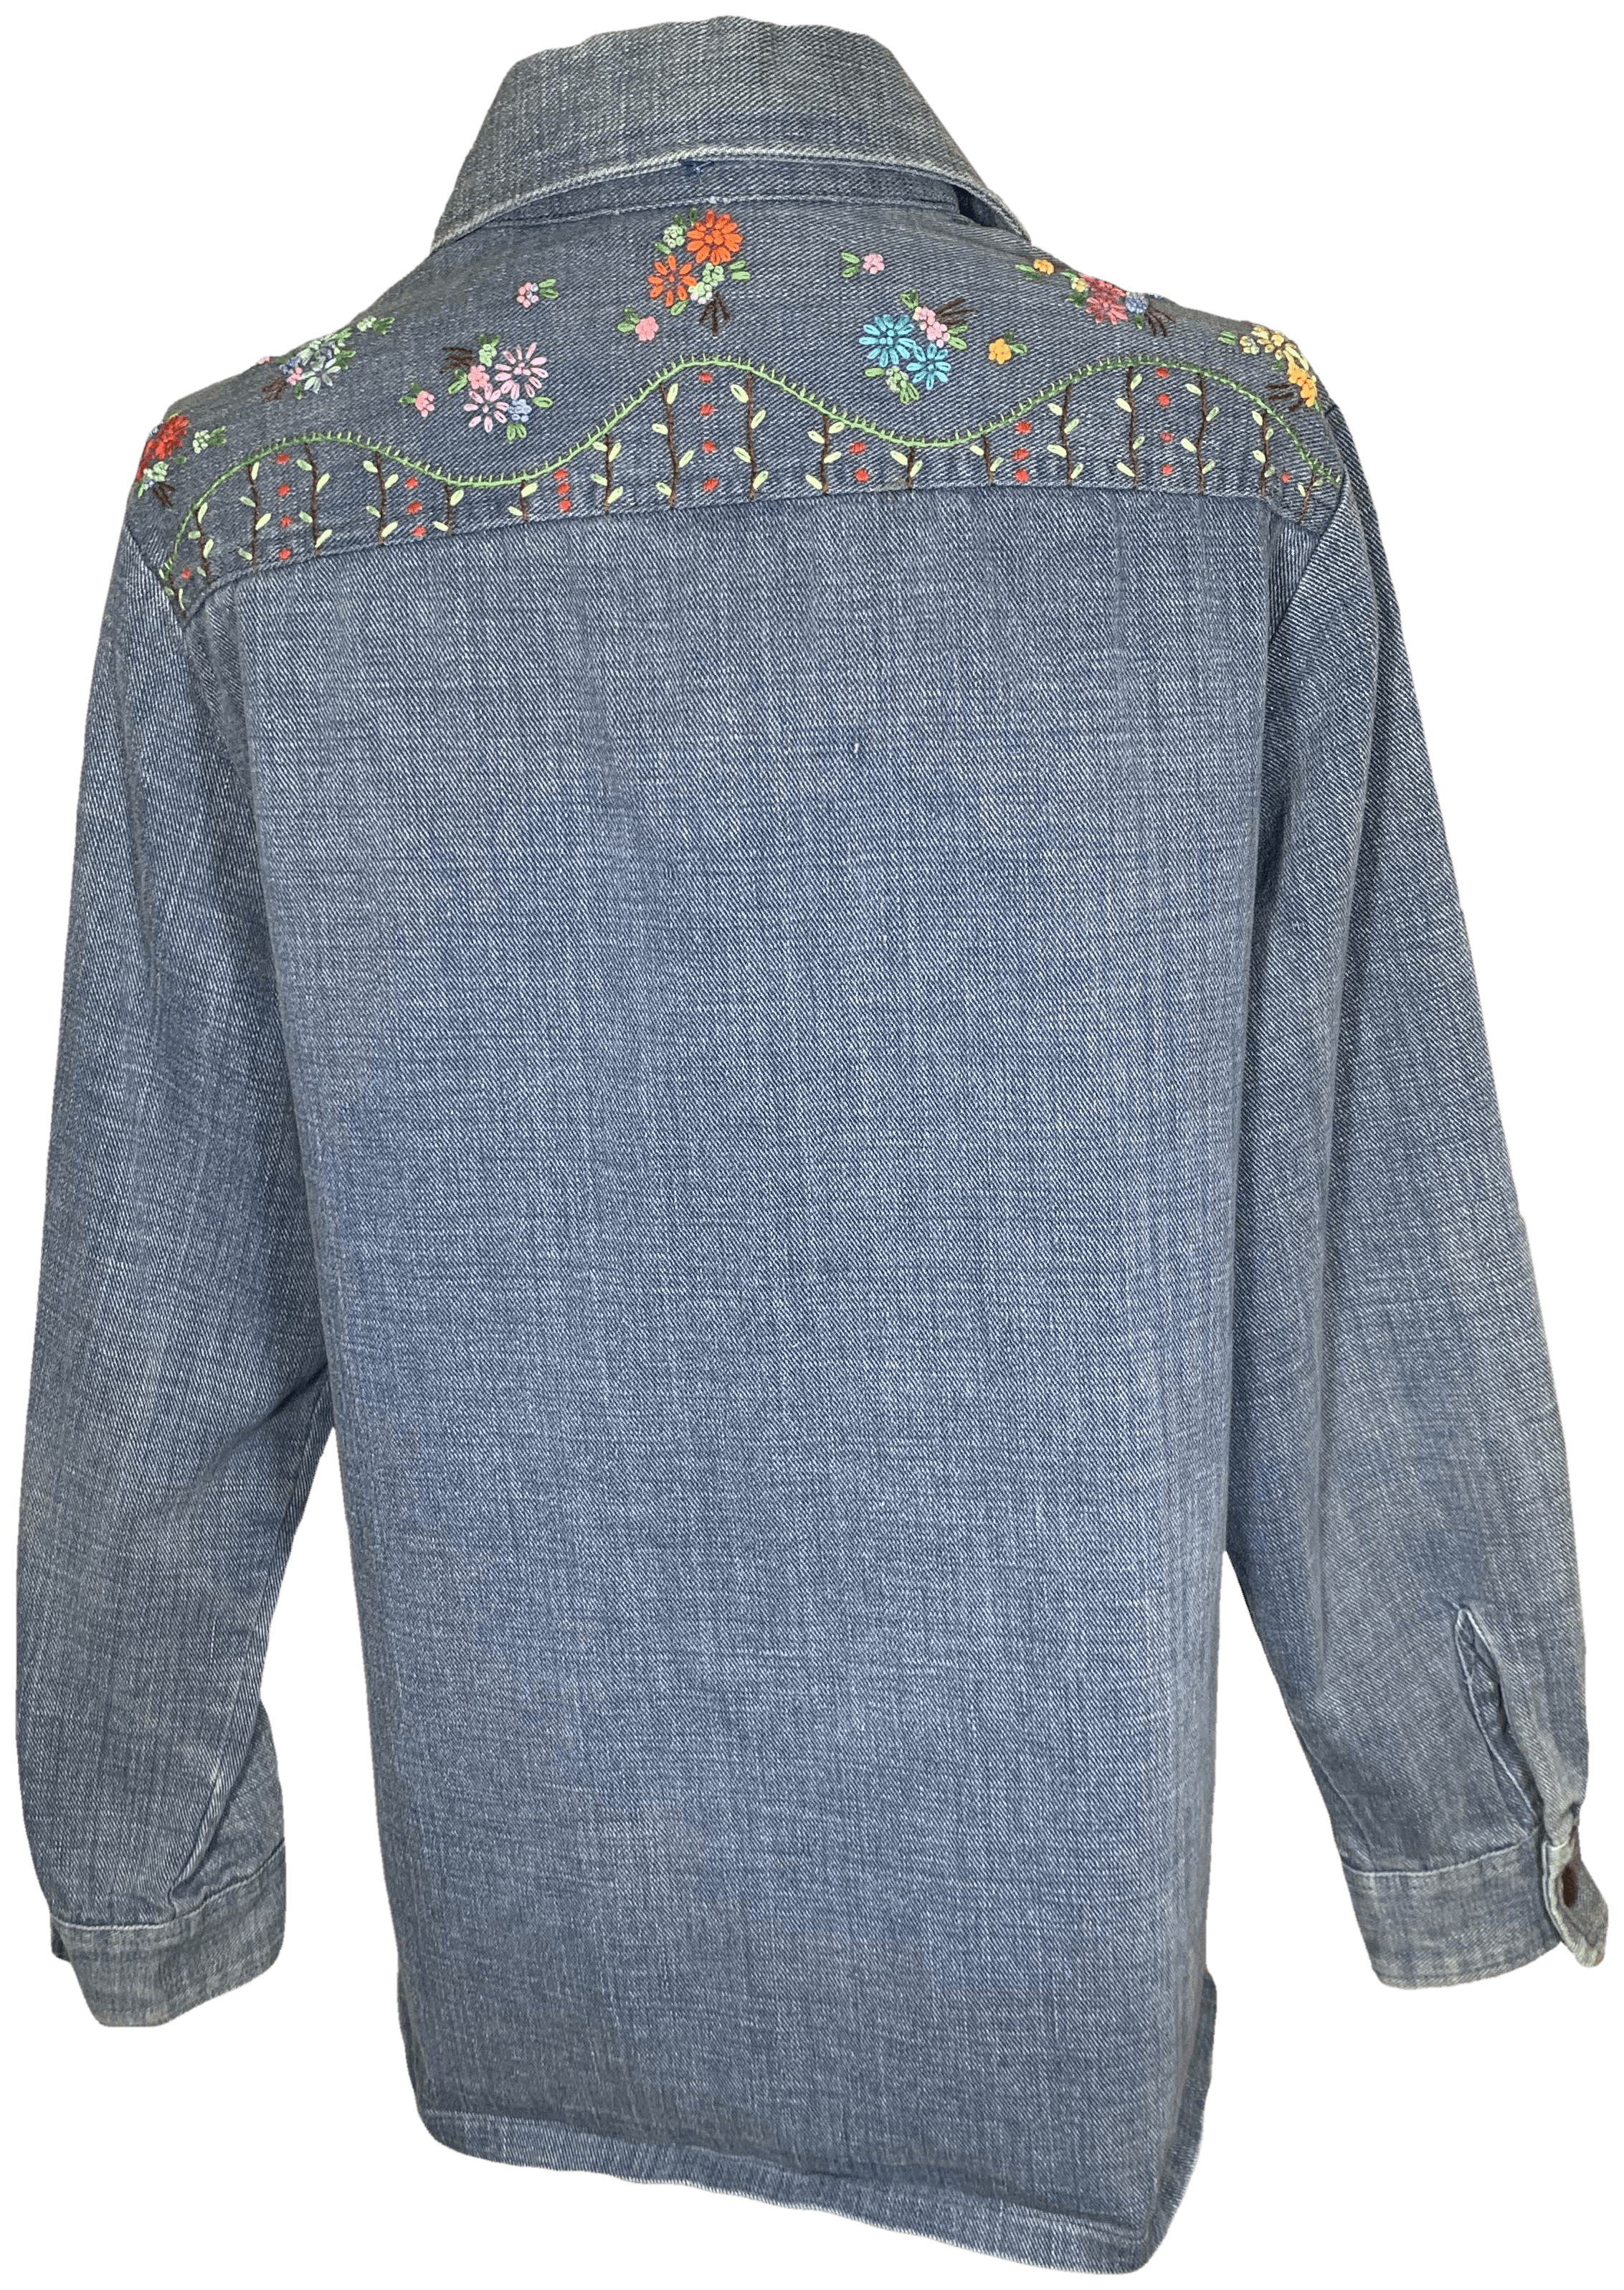 jcpenney embroidered jeans